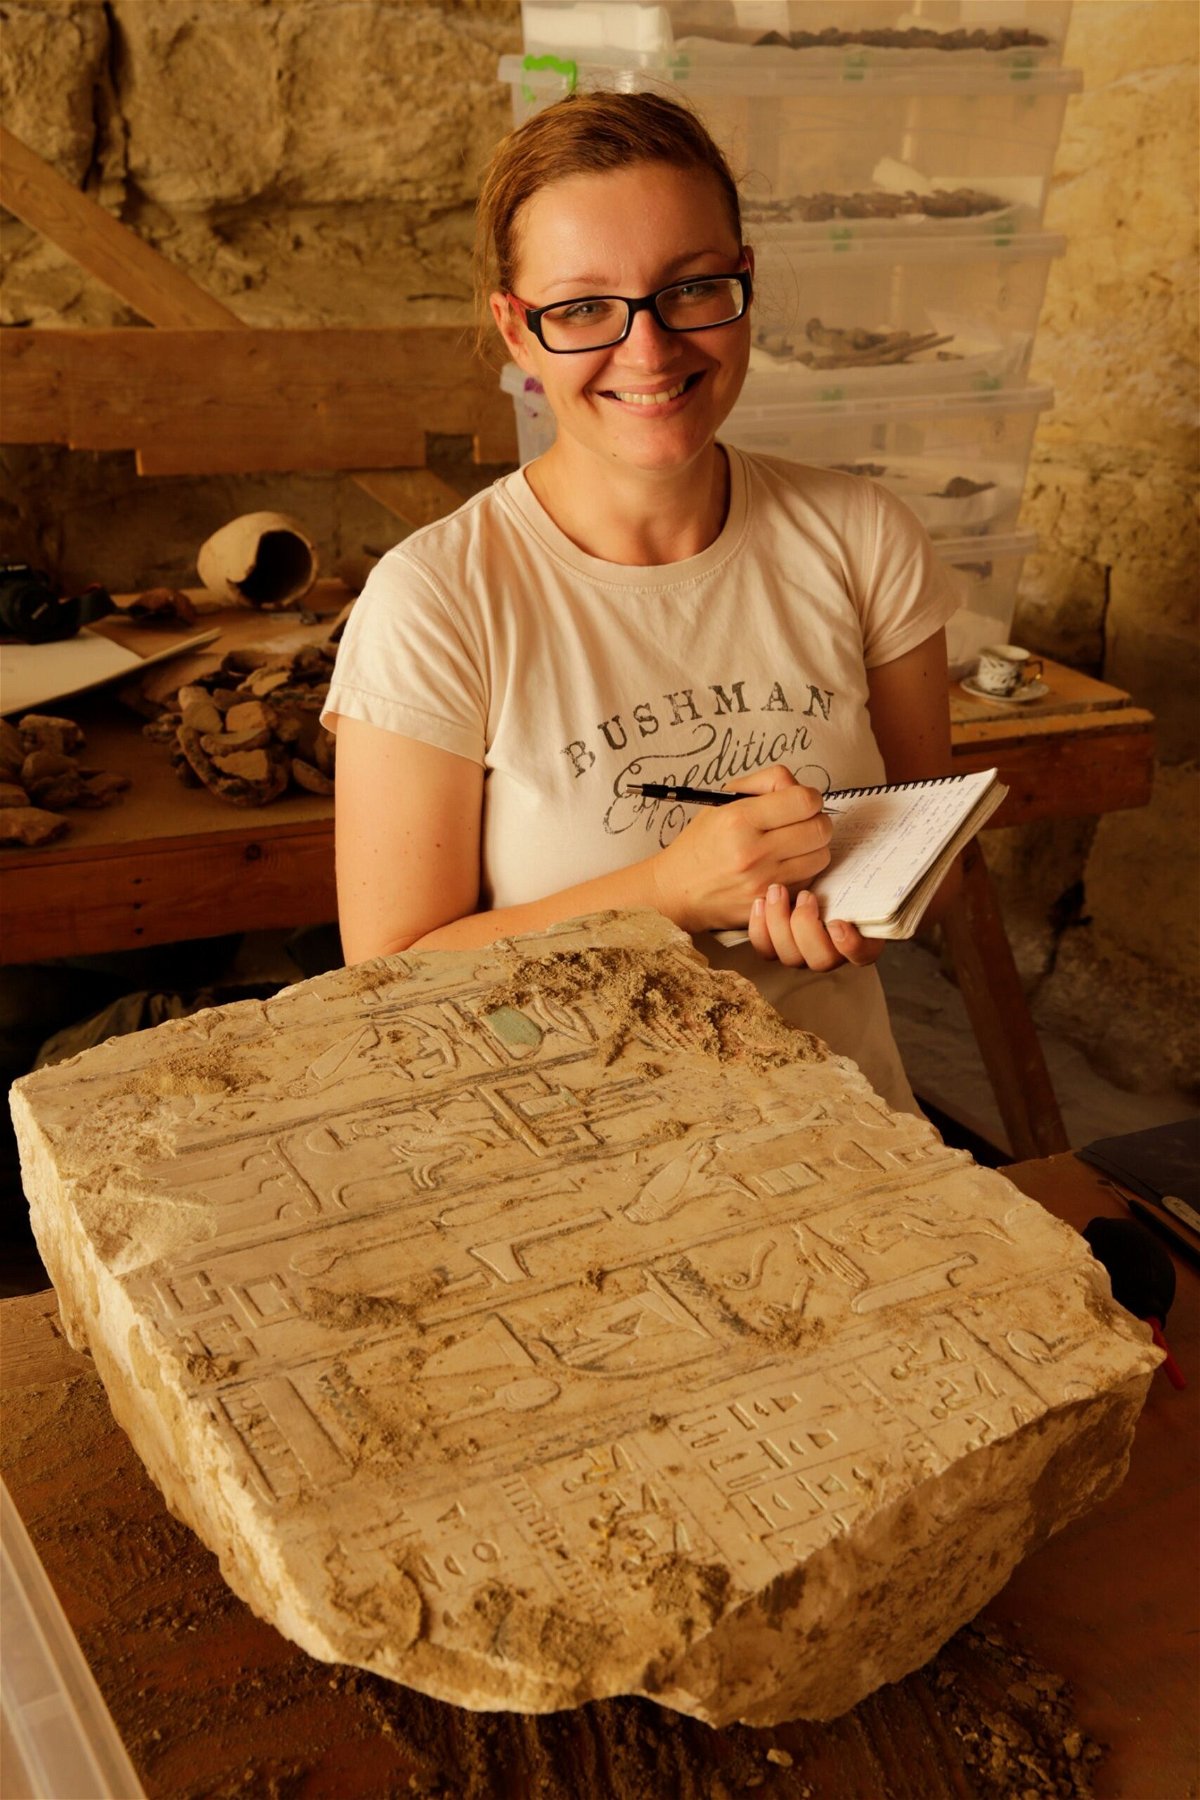 <i>Martin Frouz/Archive of Czech Institute of Egyptology; Faculty of Arts; Charles University via CNN Newsource</i><br/>Egyptologist Veronika Dulíková appears on site at Abusir documenting a hieroglyphic inscription from the tomb of the official Idu.